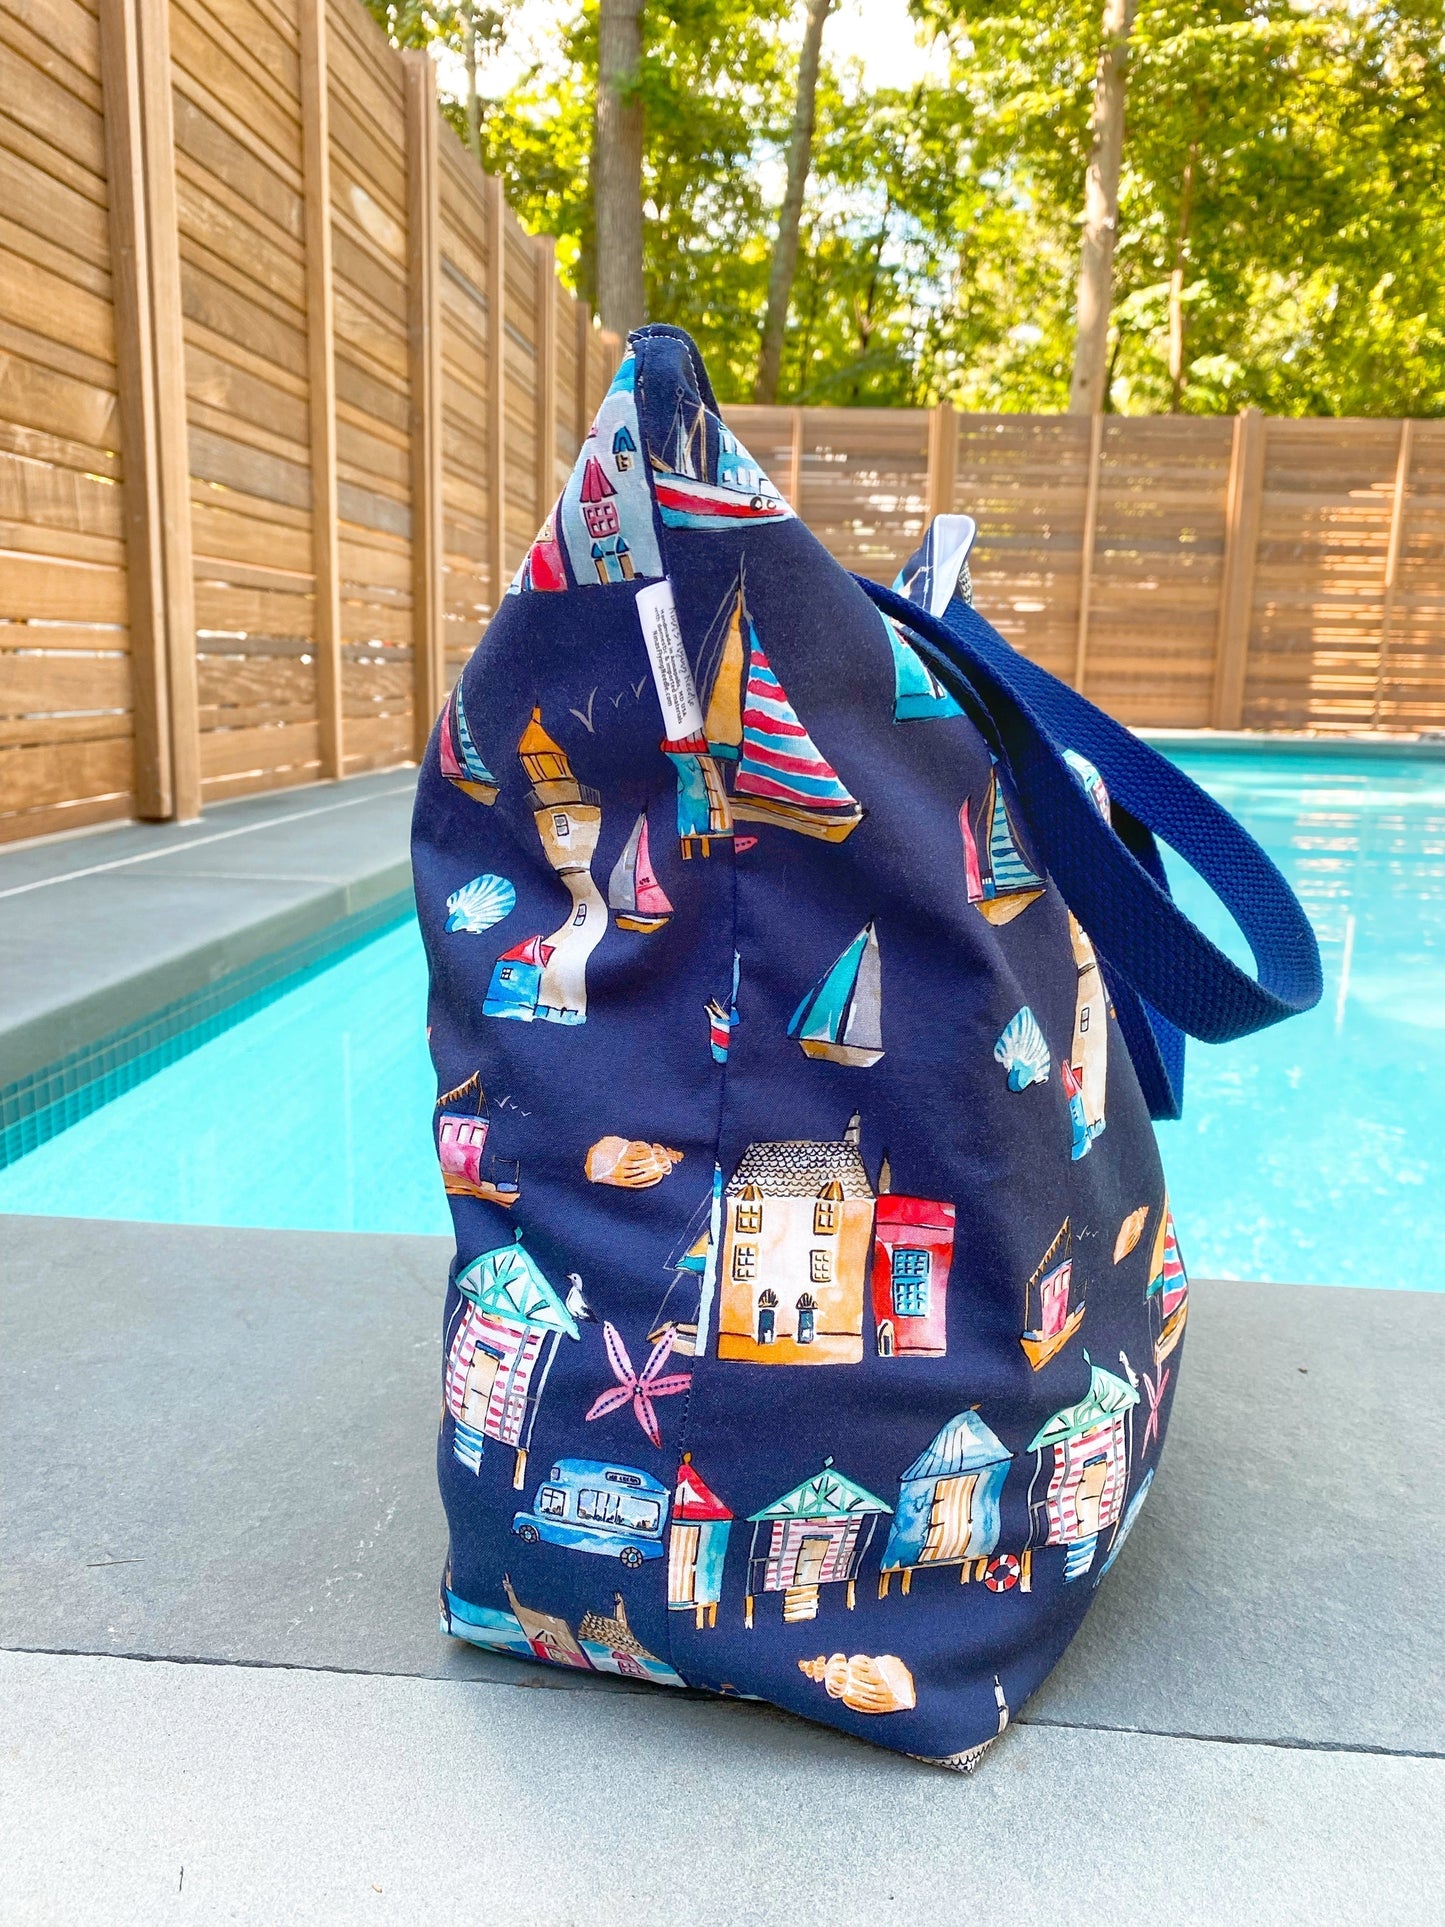 Pool Bag Anchors and Stripes